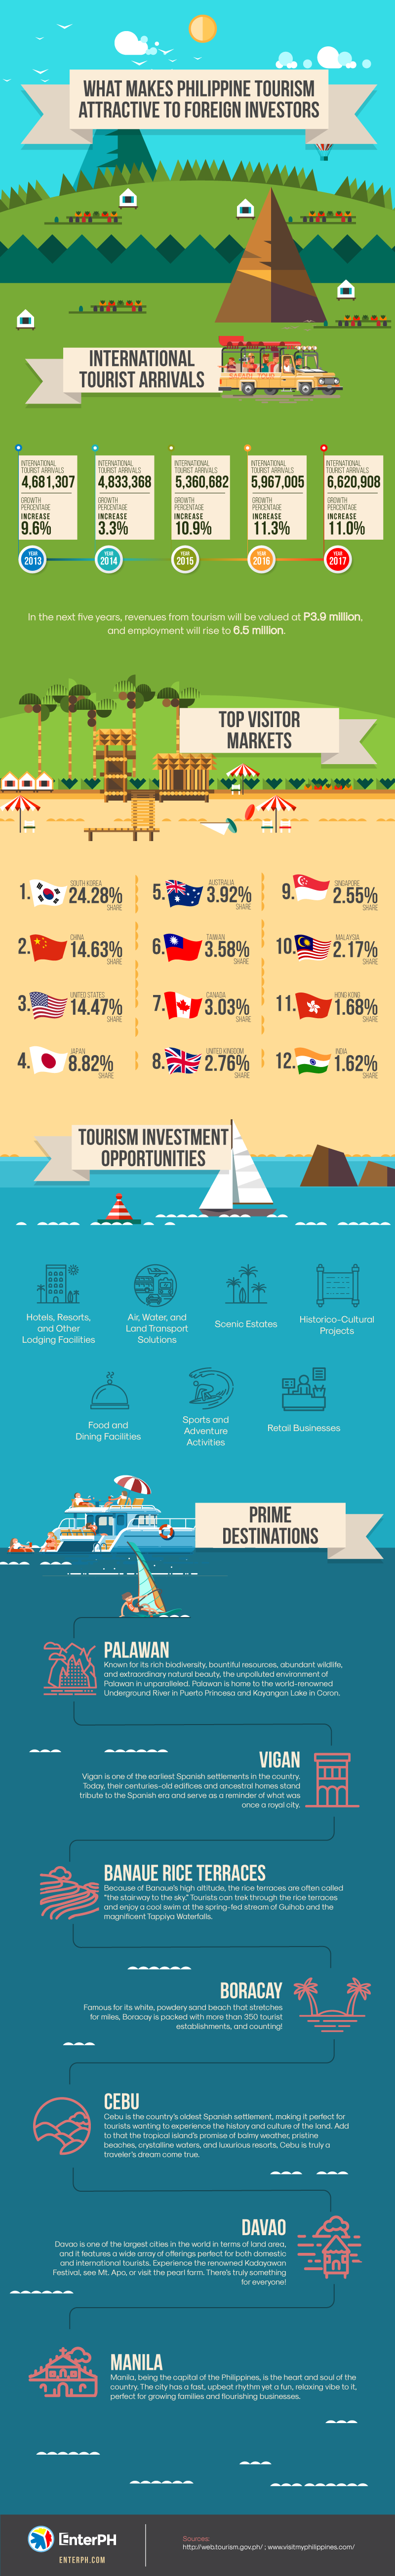 What Makes Philippine Tourism Attractive to Foreign Investors Infographic